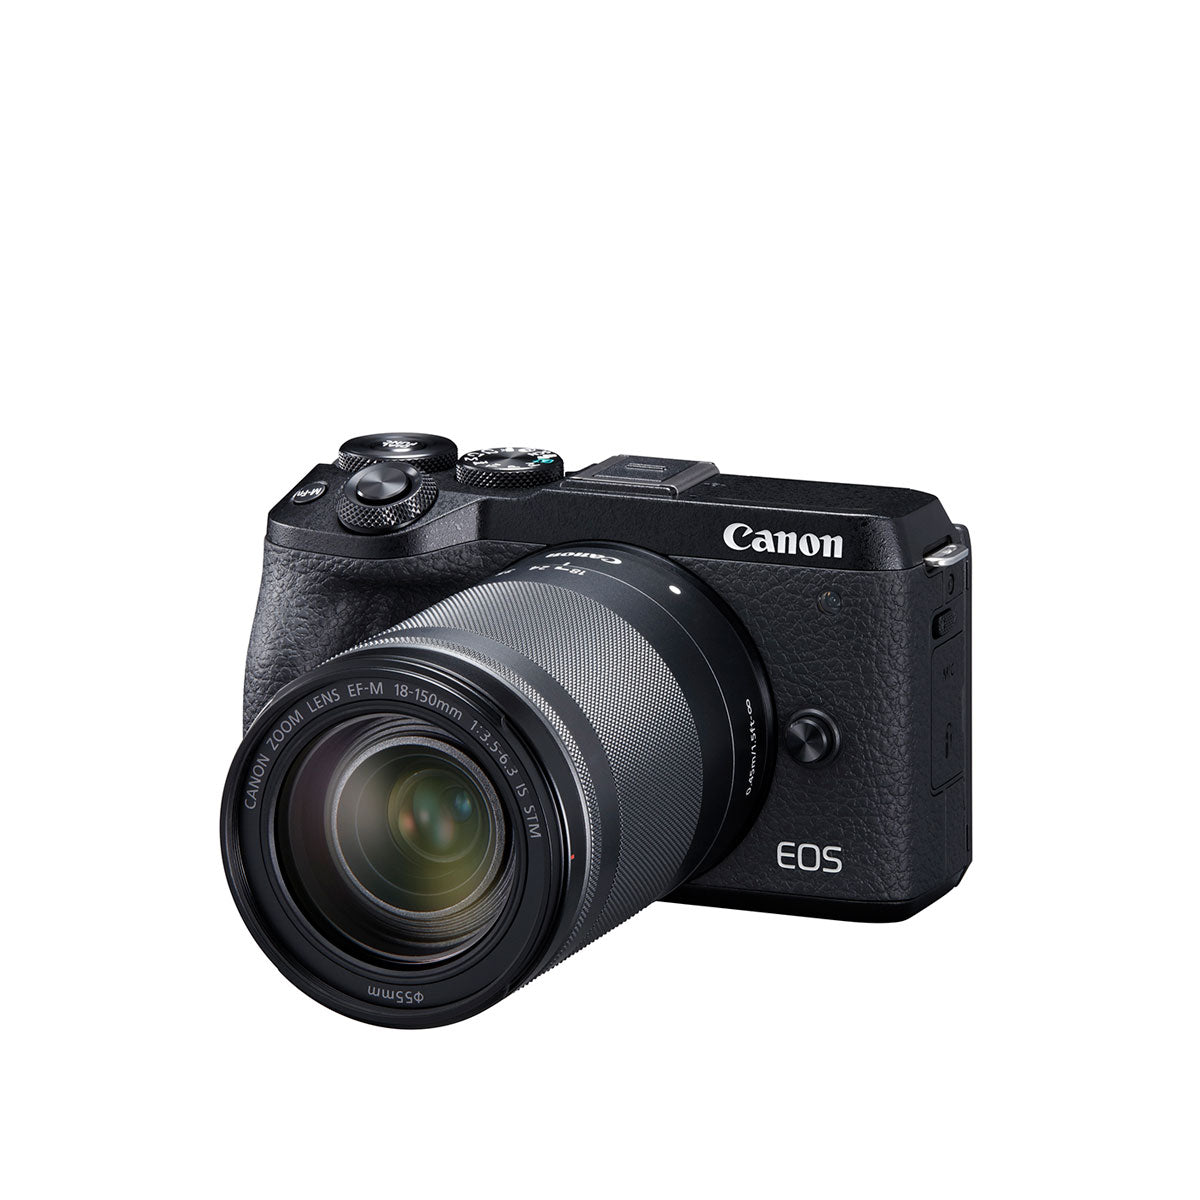 Canon EOS M6 Mark II Mirrorless Camera with EF-M 18-150mm IS STM Lens and EVF (Black)